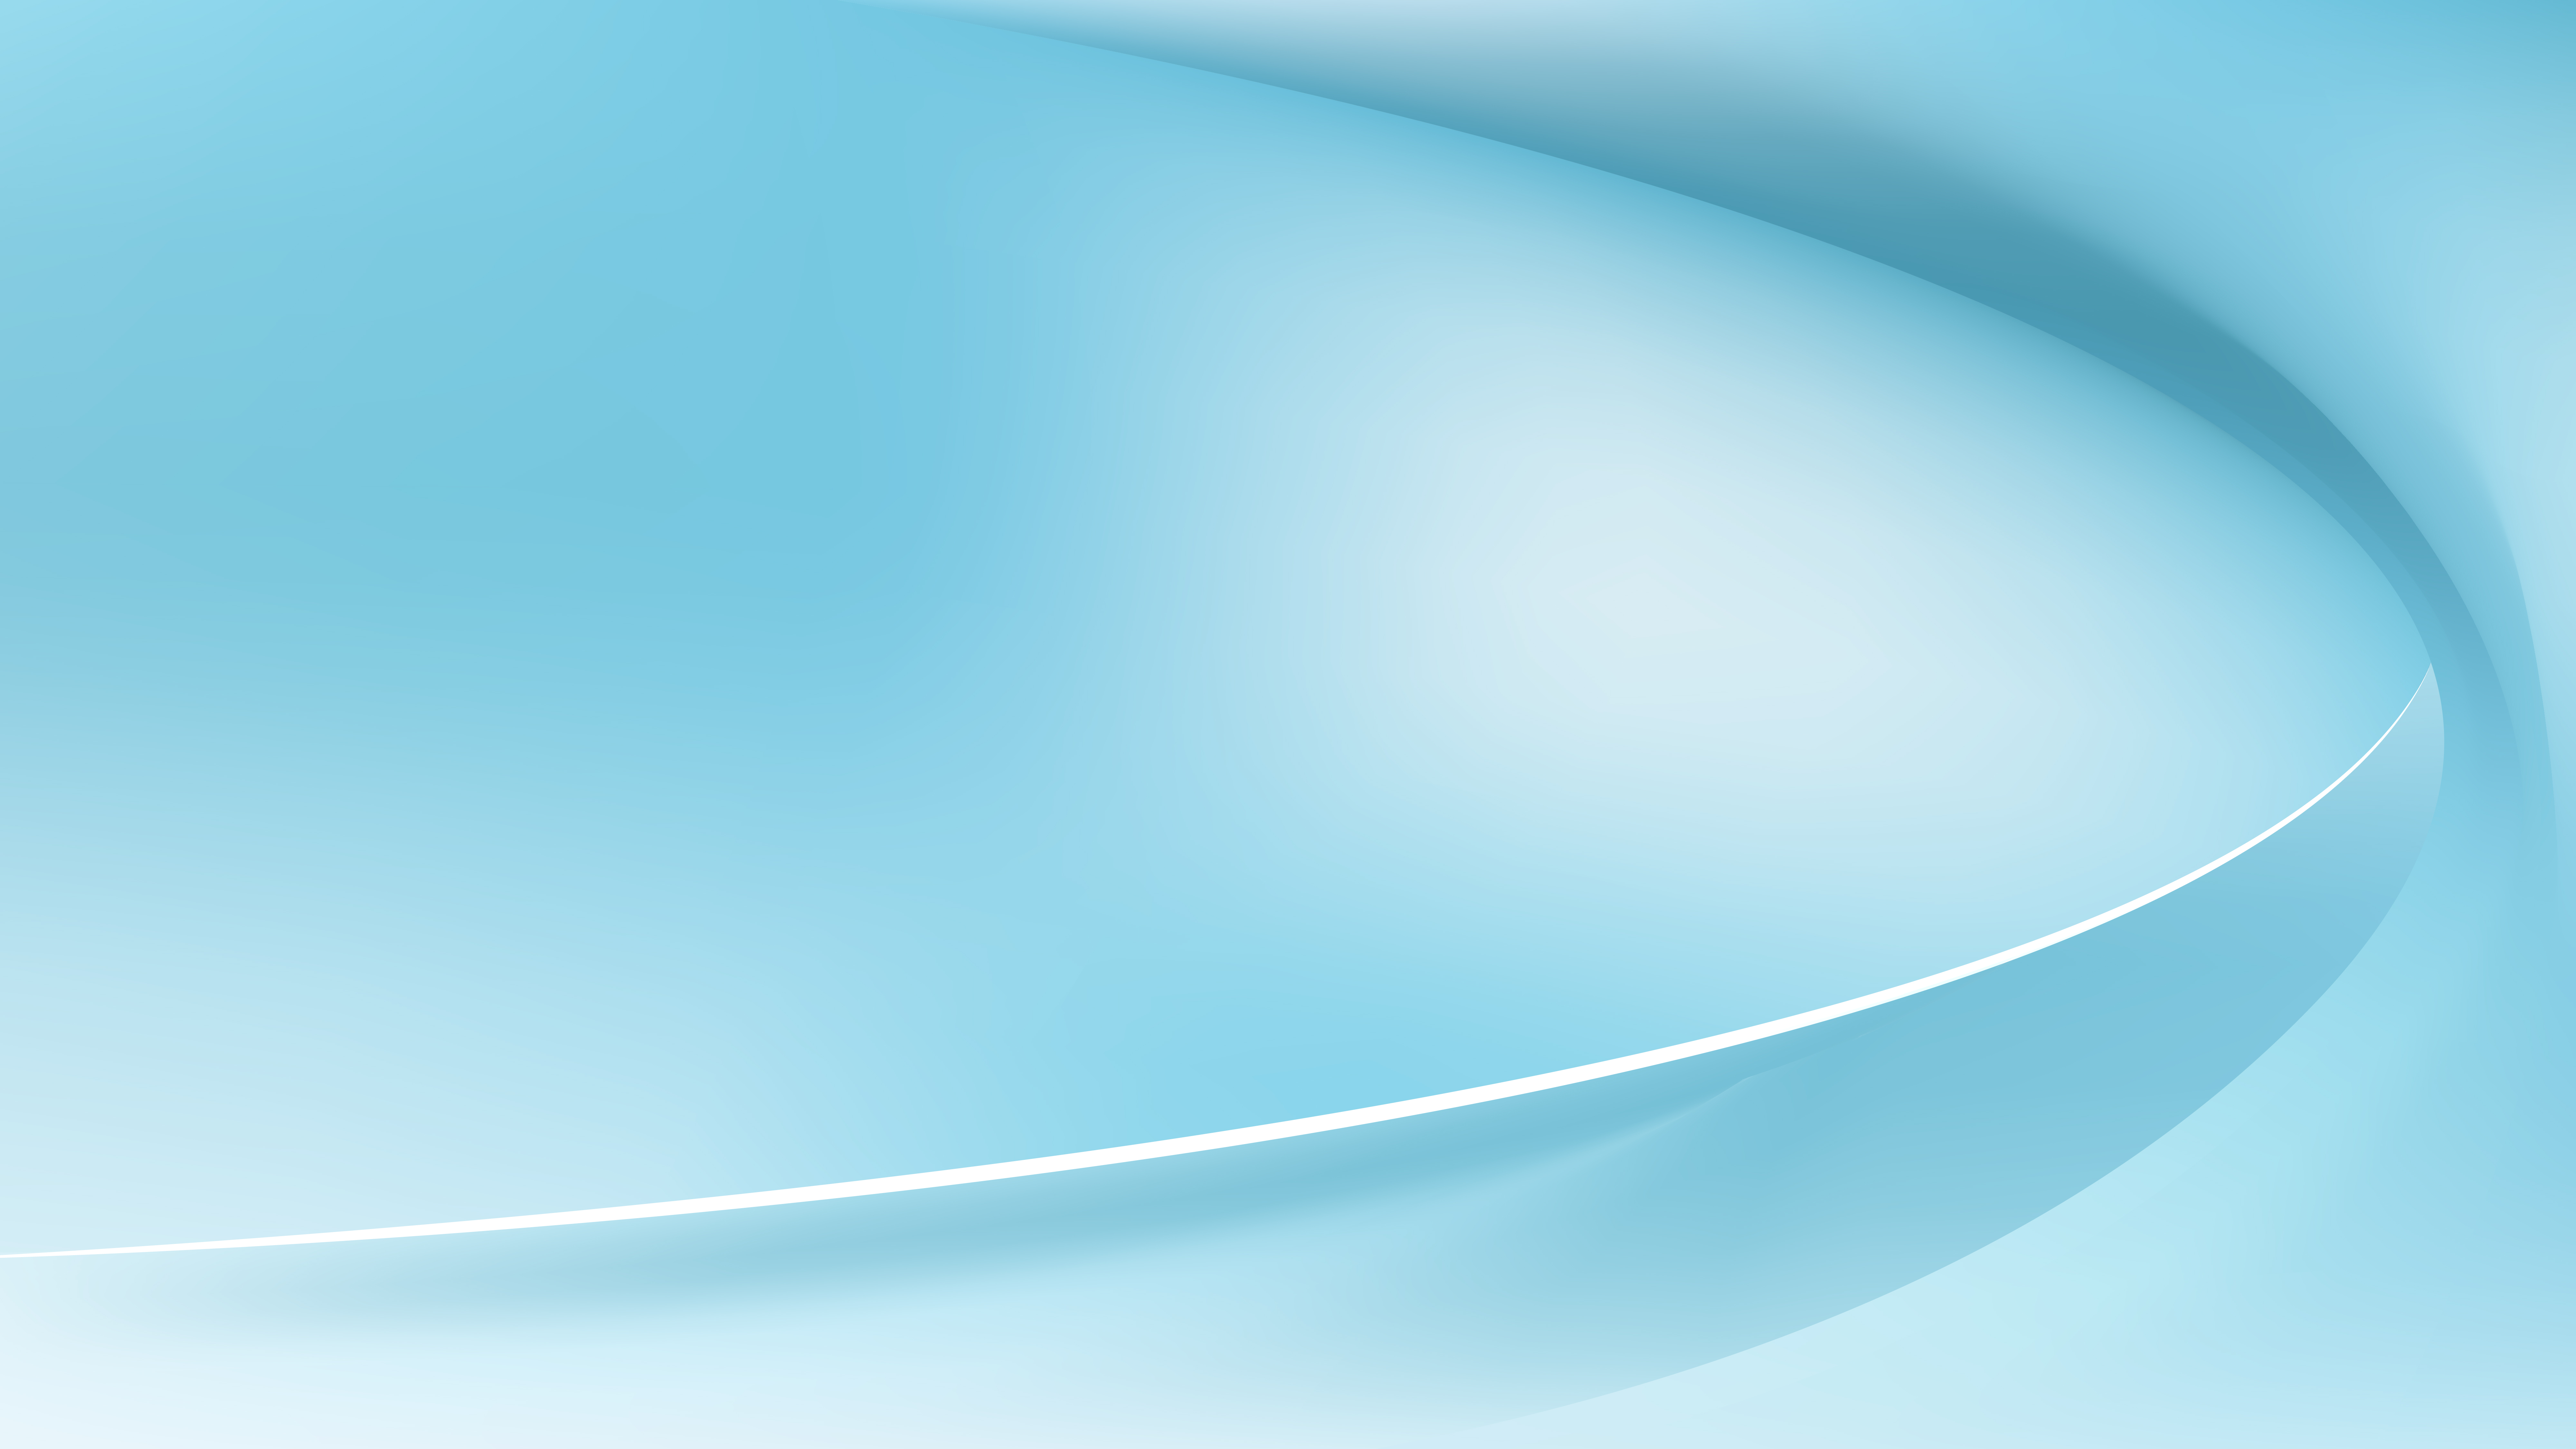 Free Light Blue Wave Background Template